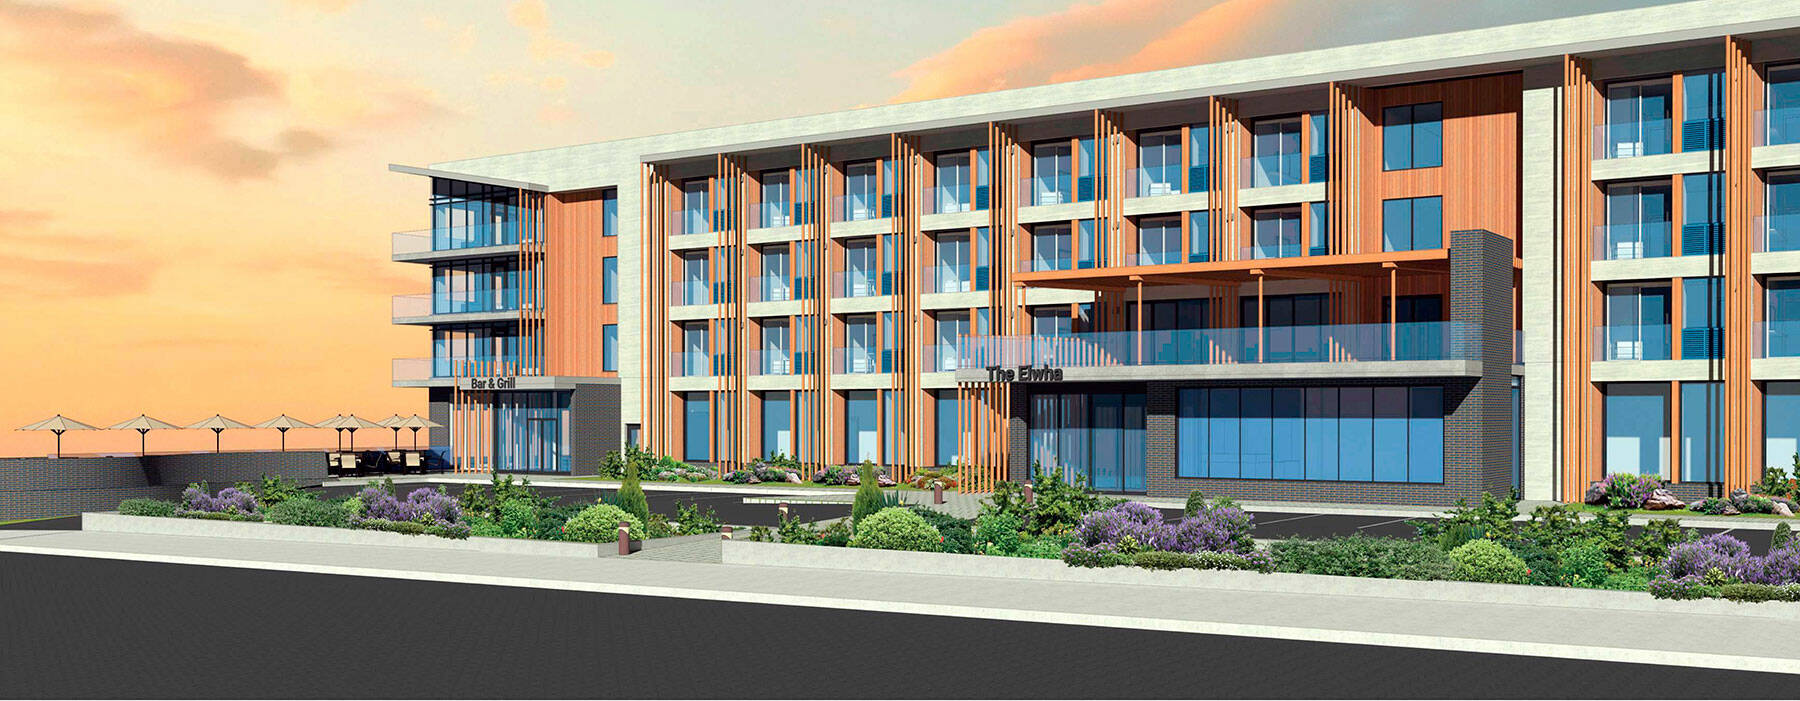 Waterleaf Architecture created this latest rendering of the downtown Port Angeles hotel planned by the Lower Elwha Klallam Tribe.